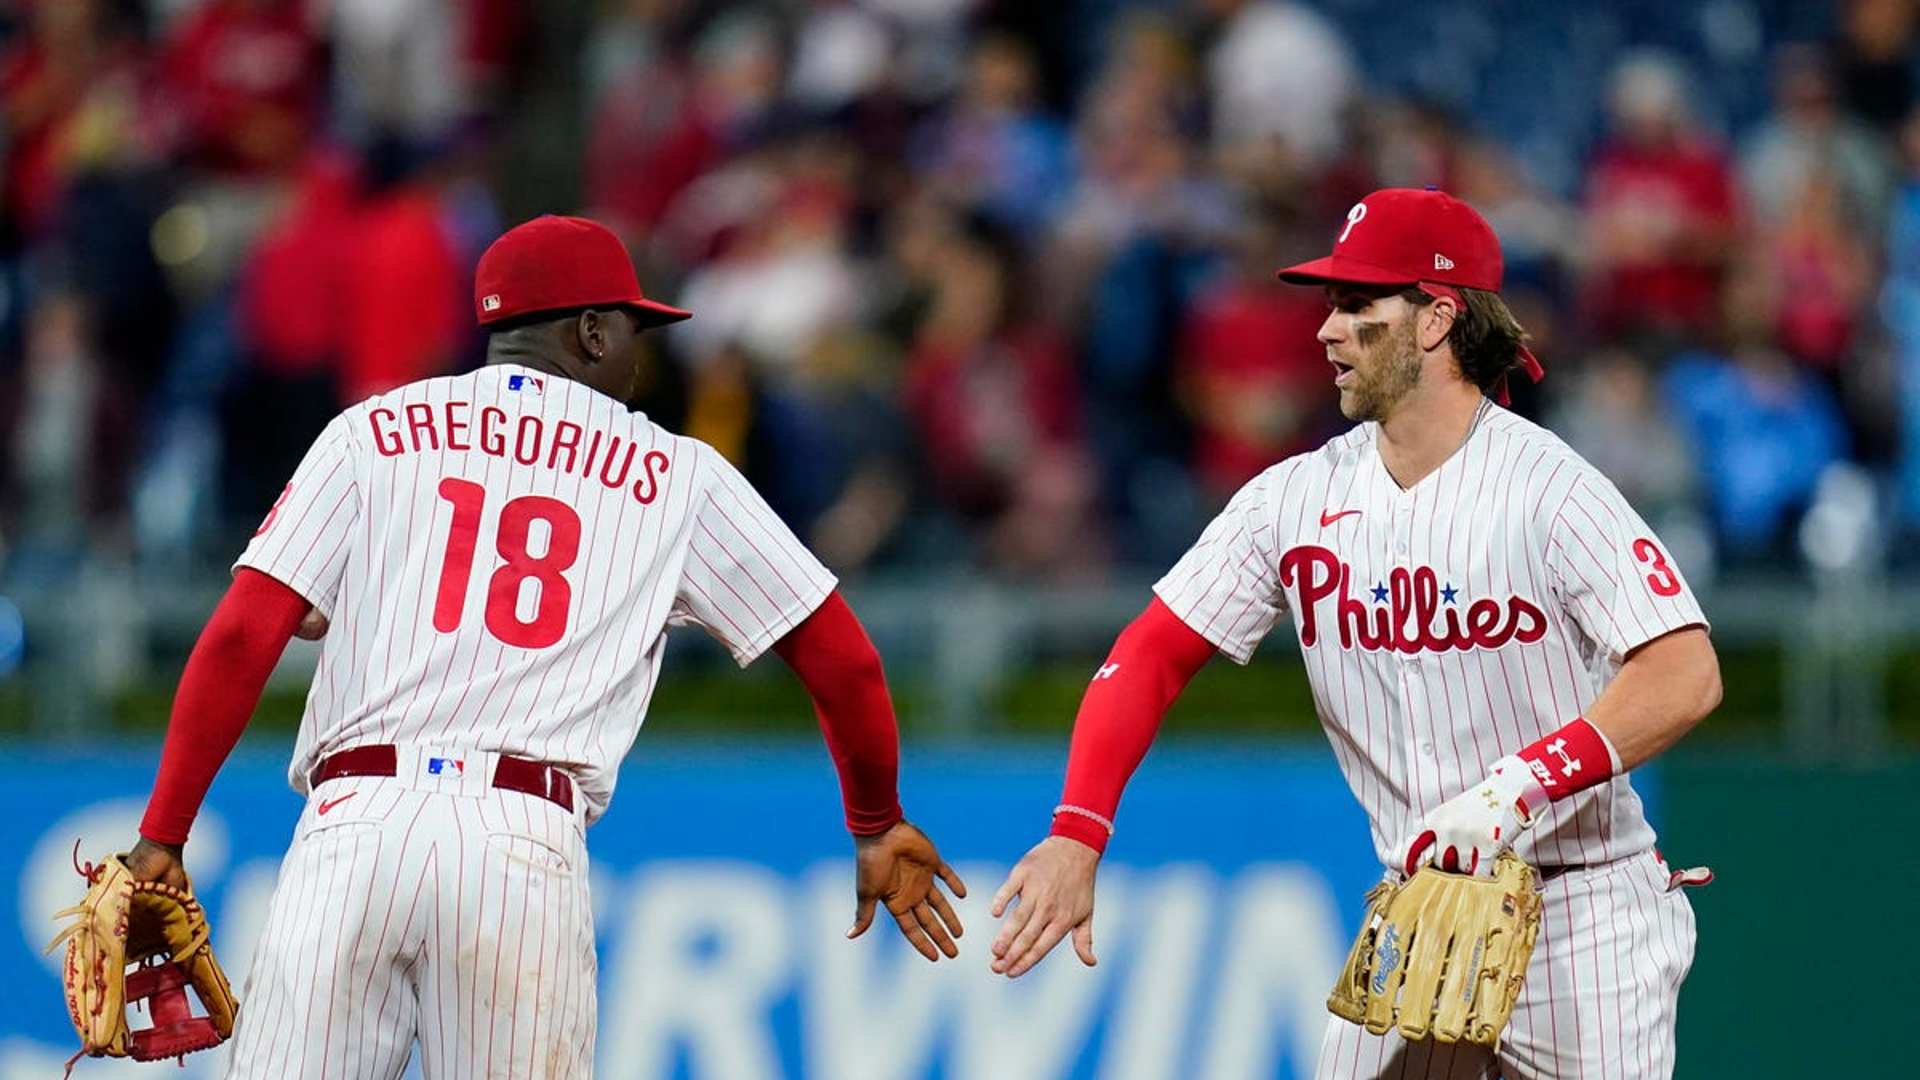 The match Philadelphia Phillies vs Miami Marlins will take place at Citizens Bank Park in Philadelphia on Thursday, September 8 at 6:45 PM ET. (Image credits: Twitter)